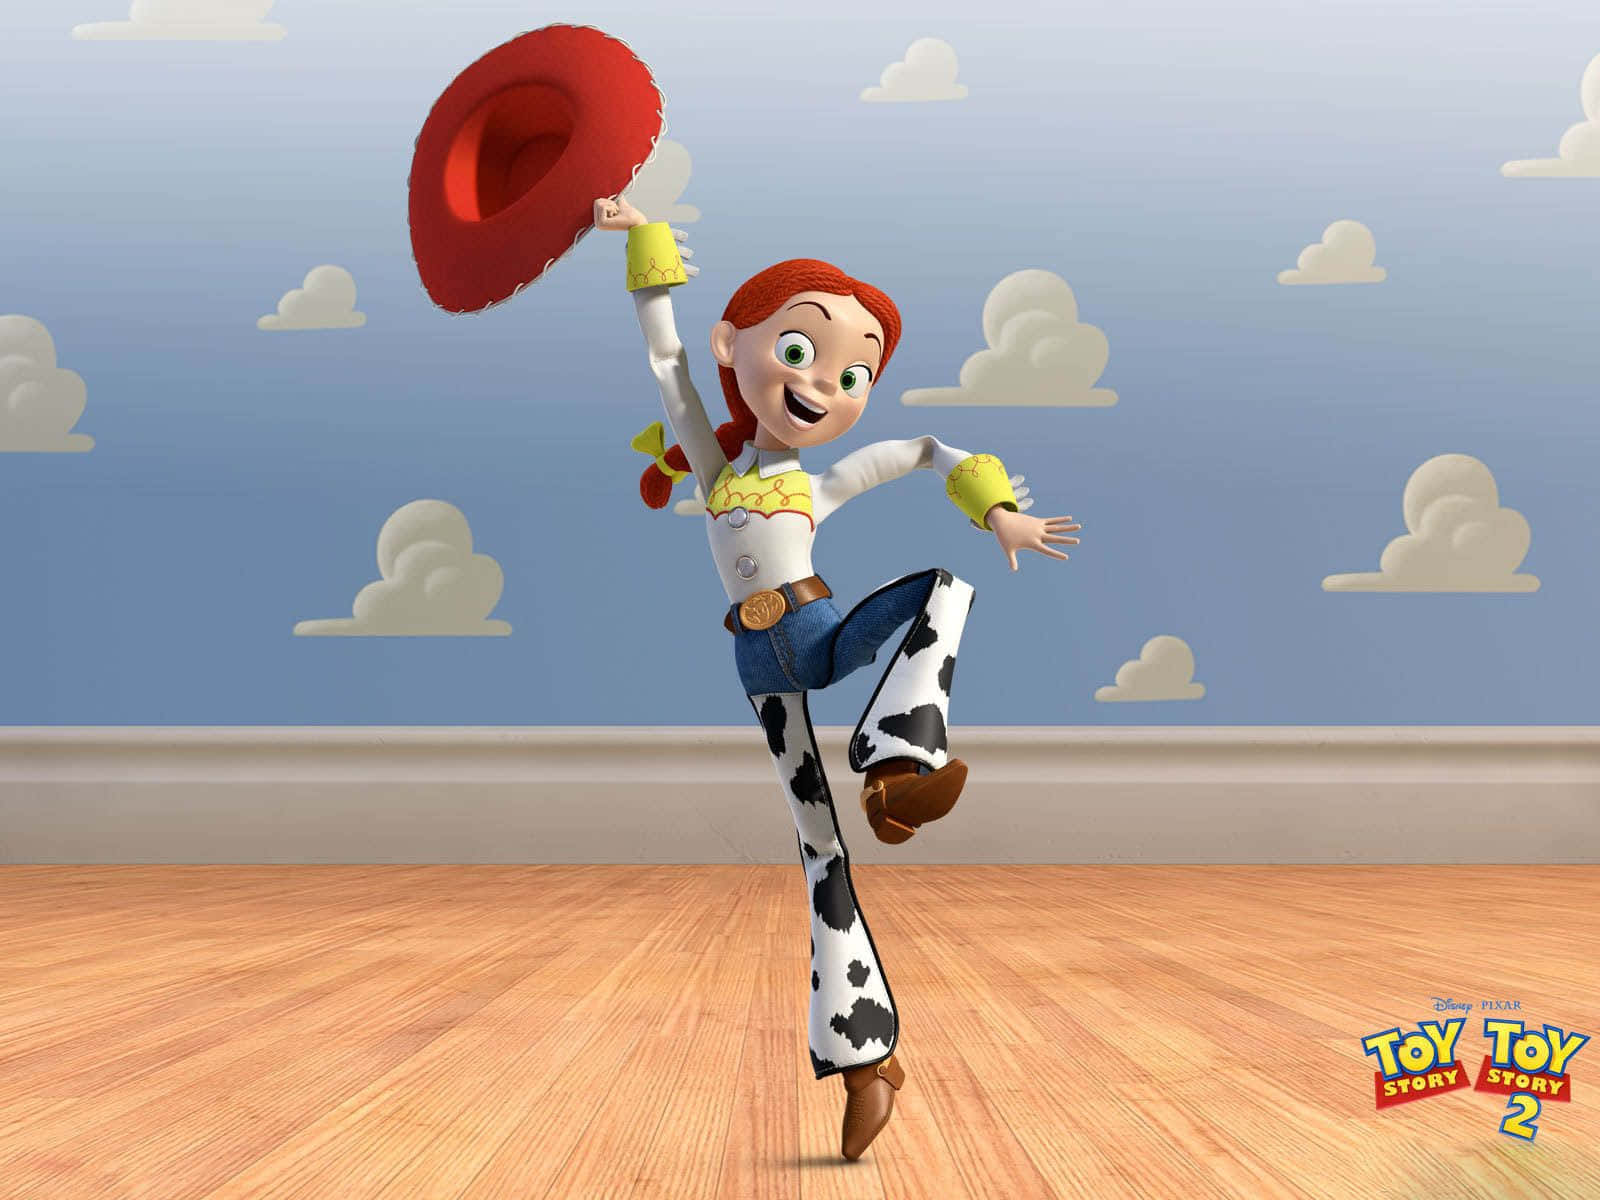 The iconic Toy Story Cloud wallpaper featuring Andy's bedroom sky